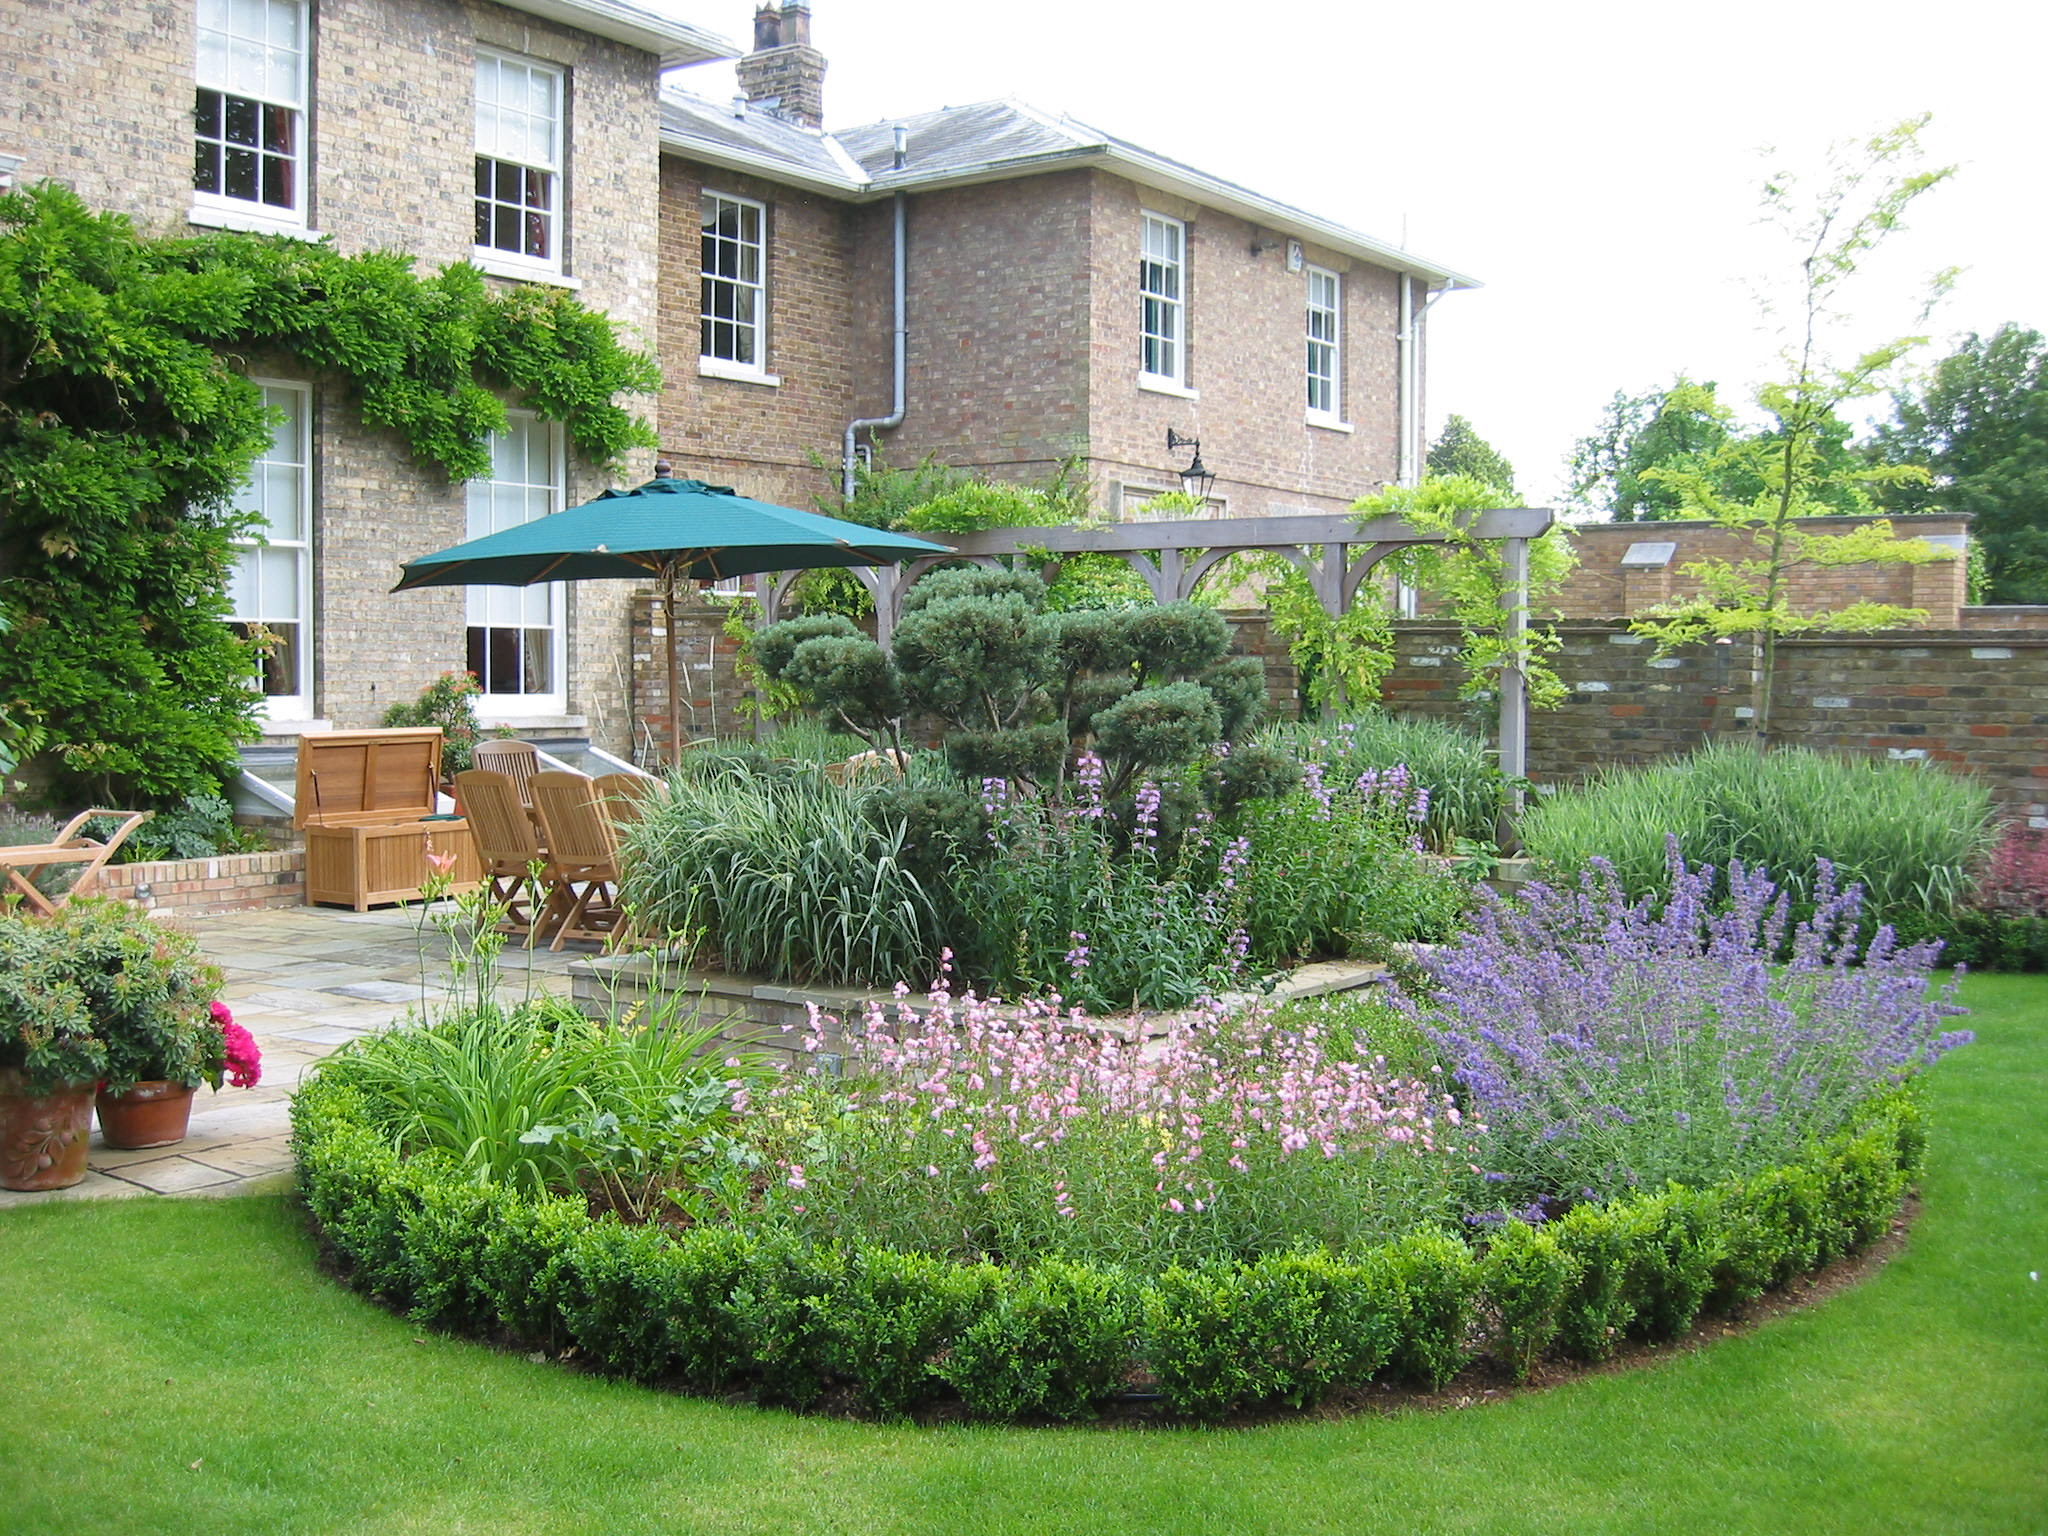 You Can Do Your Own Landscape Design – It Is Easy!